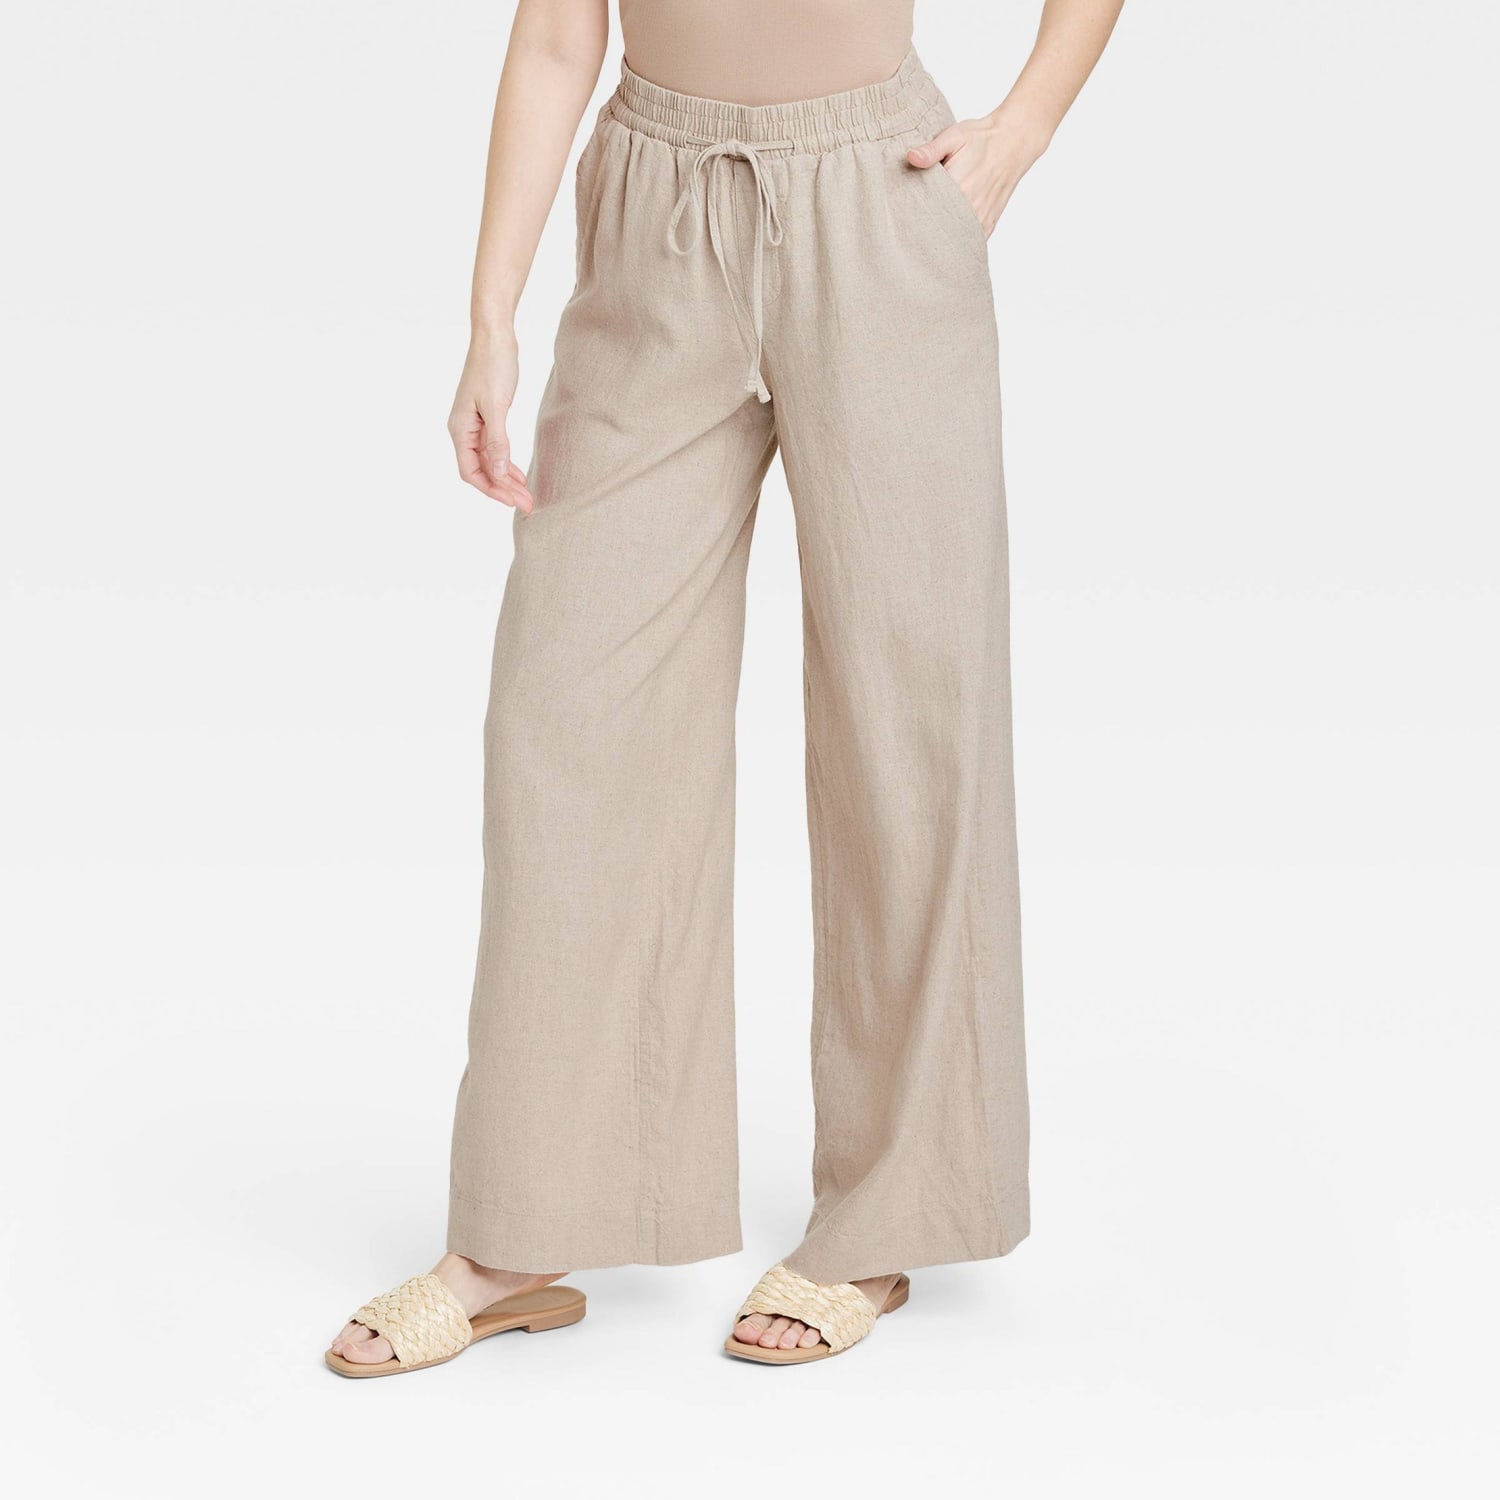 The perfect low-waisted linen pants and yoga pants